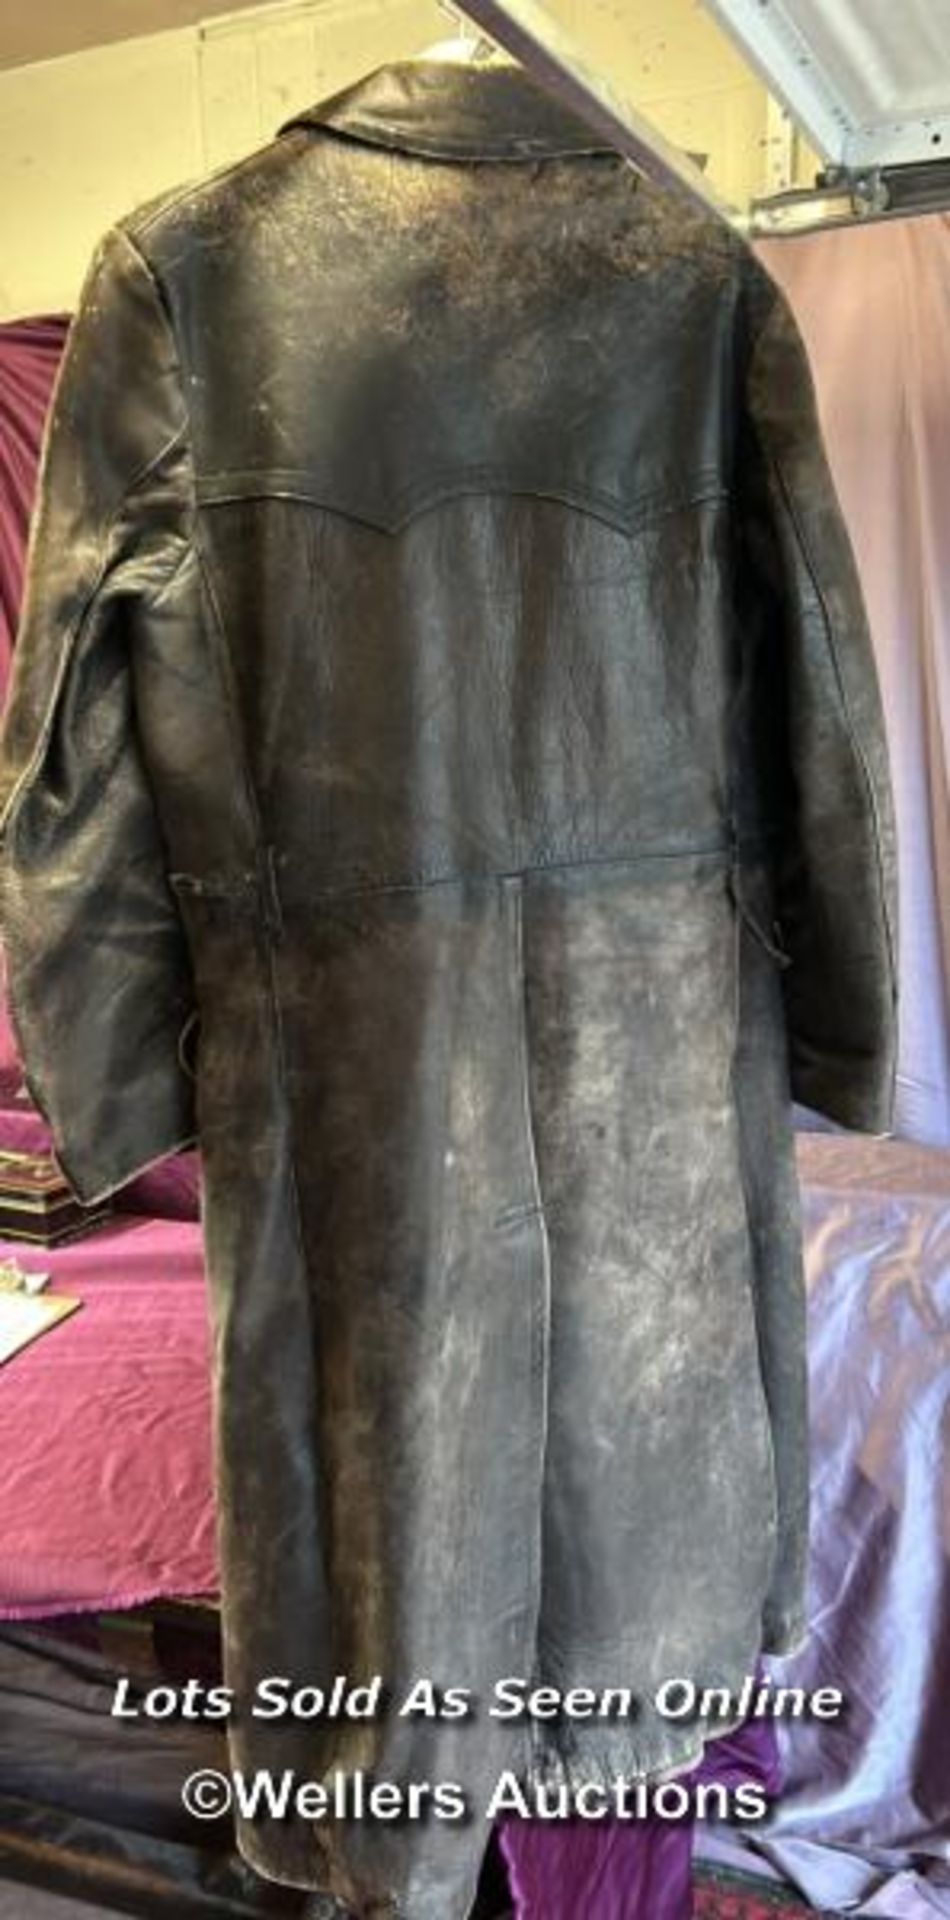 VINTAGE LONG LEATHER MILITARY COAT - Image 5 of 5